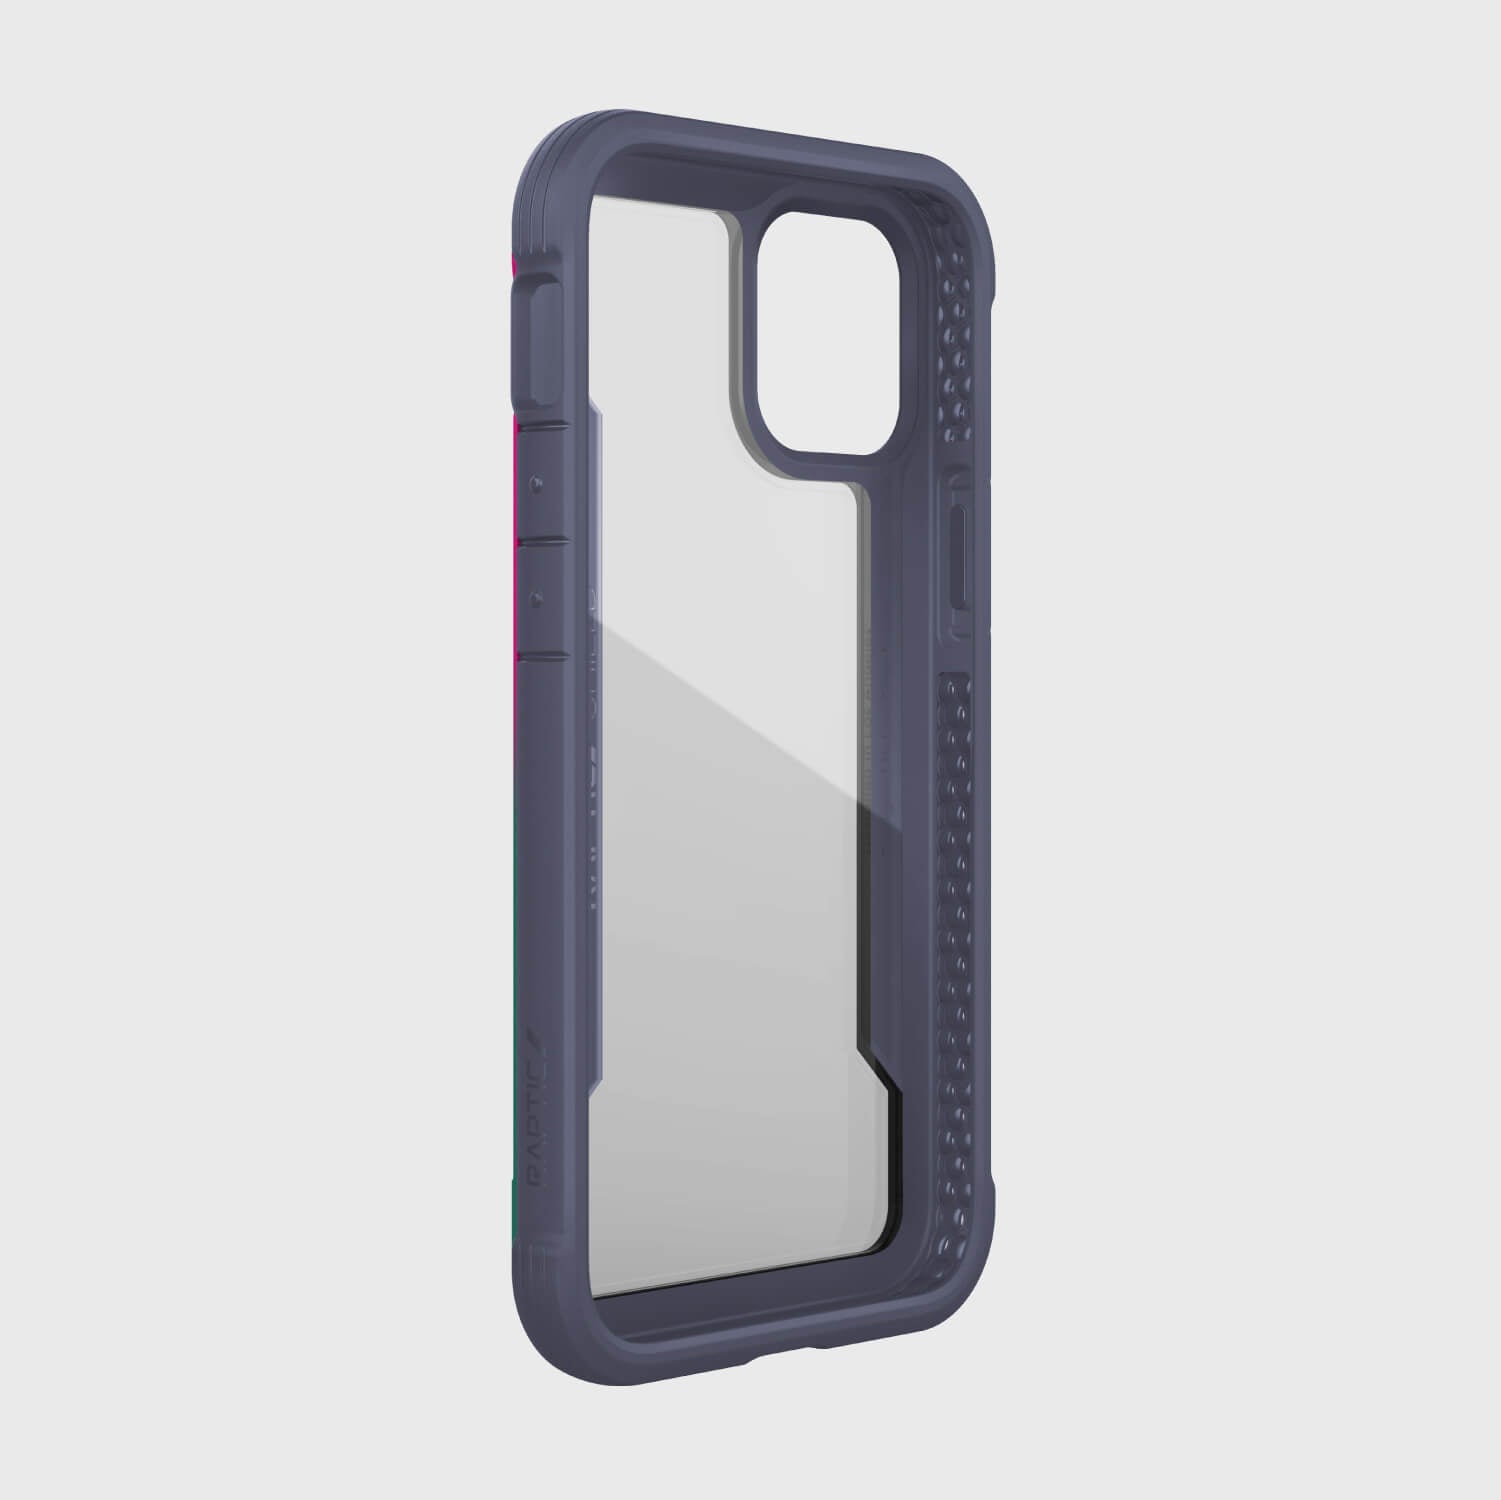 The back of the iPhone 12 Mini Case - SHIELD by Raptic is shown.